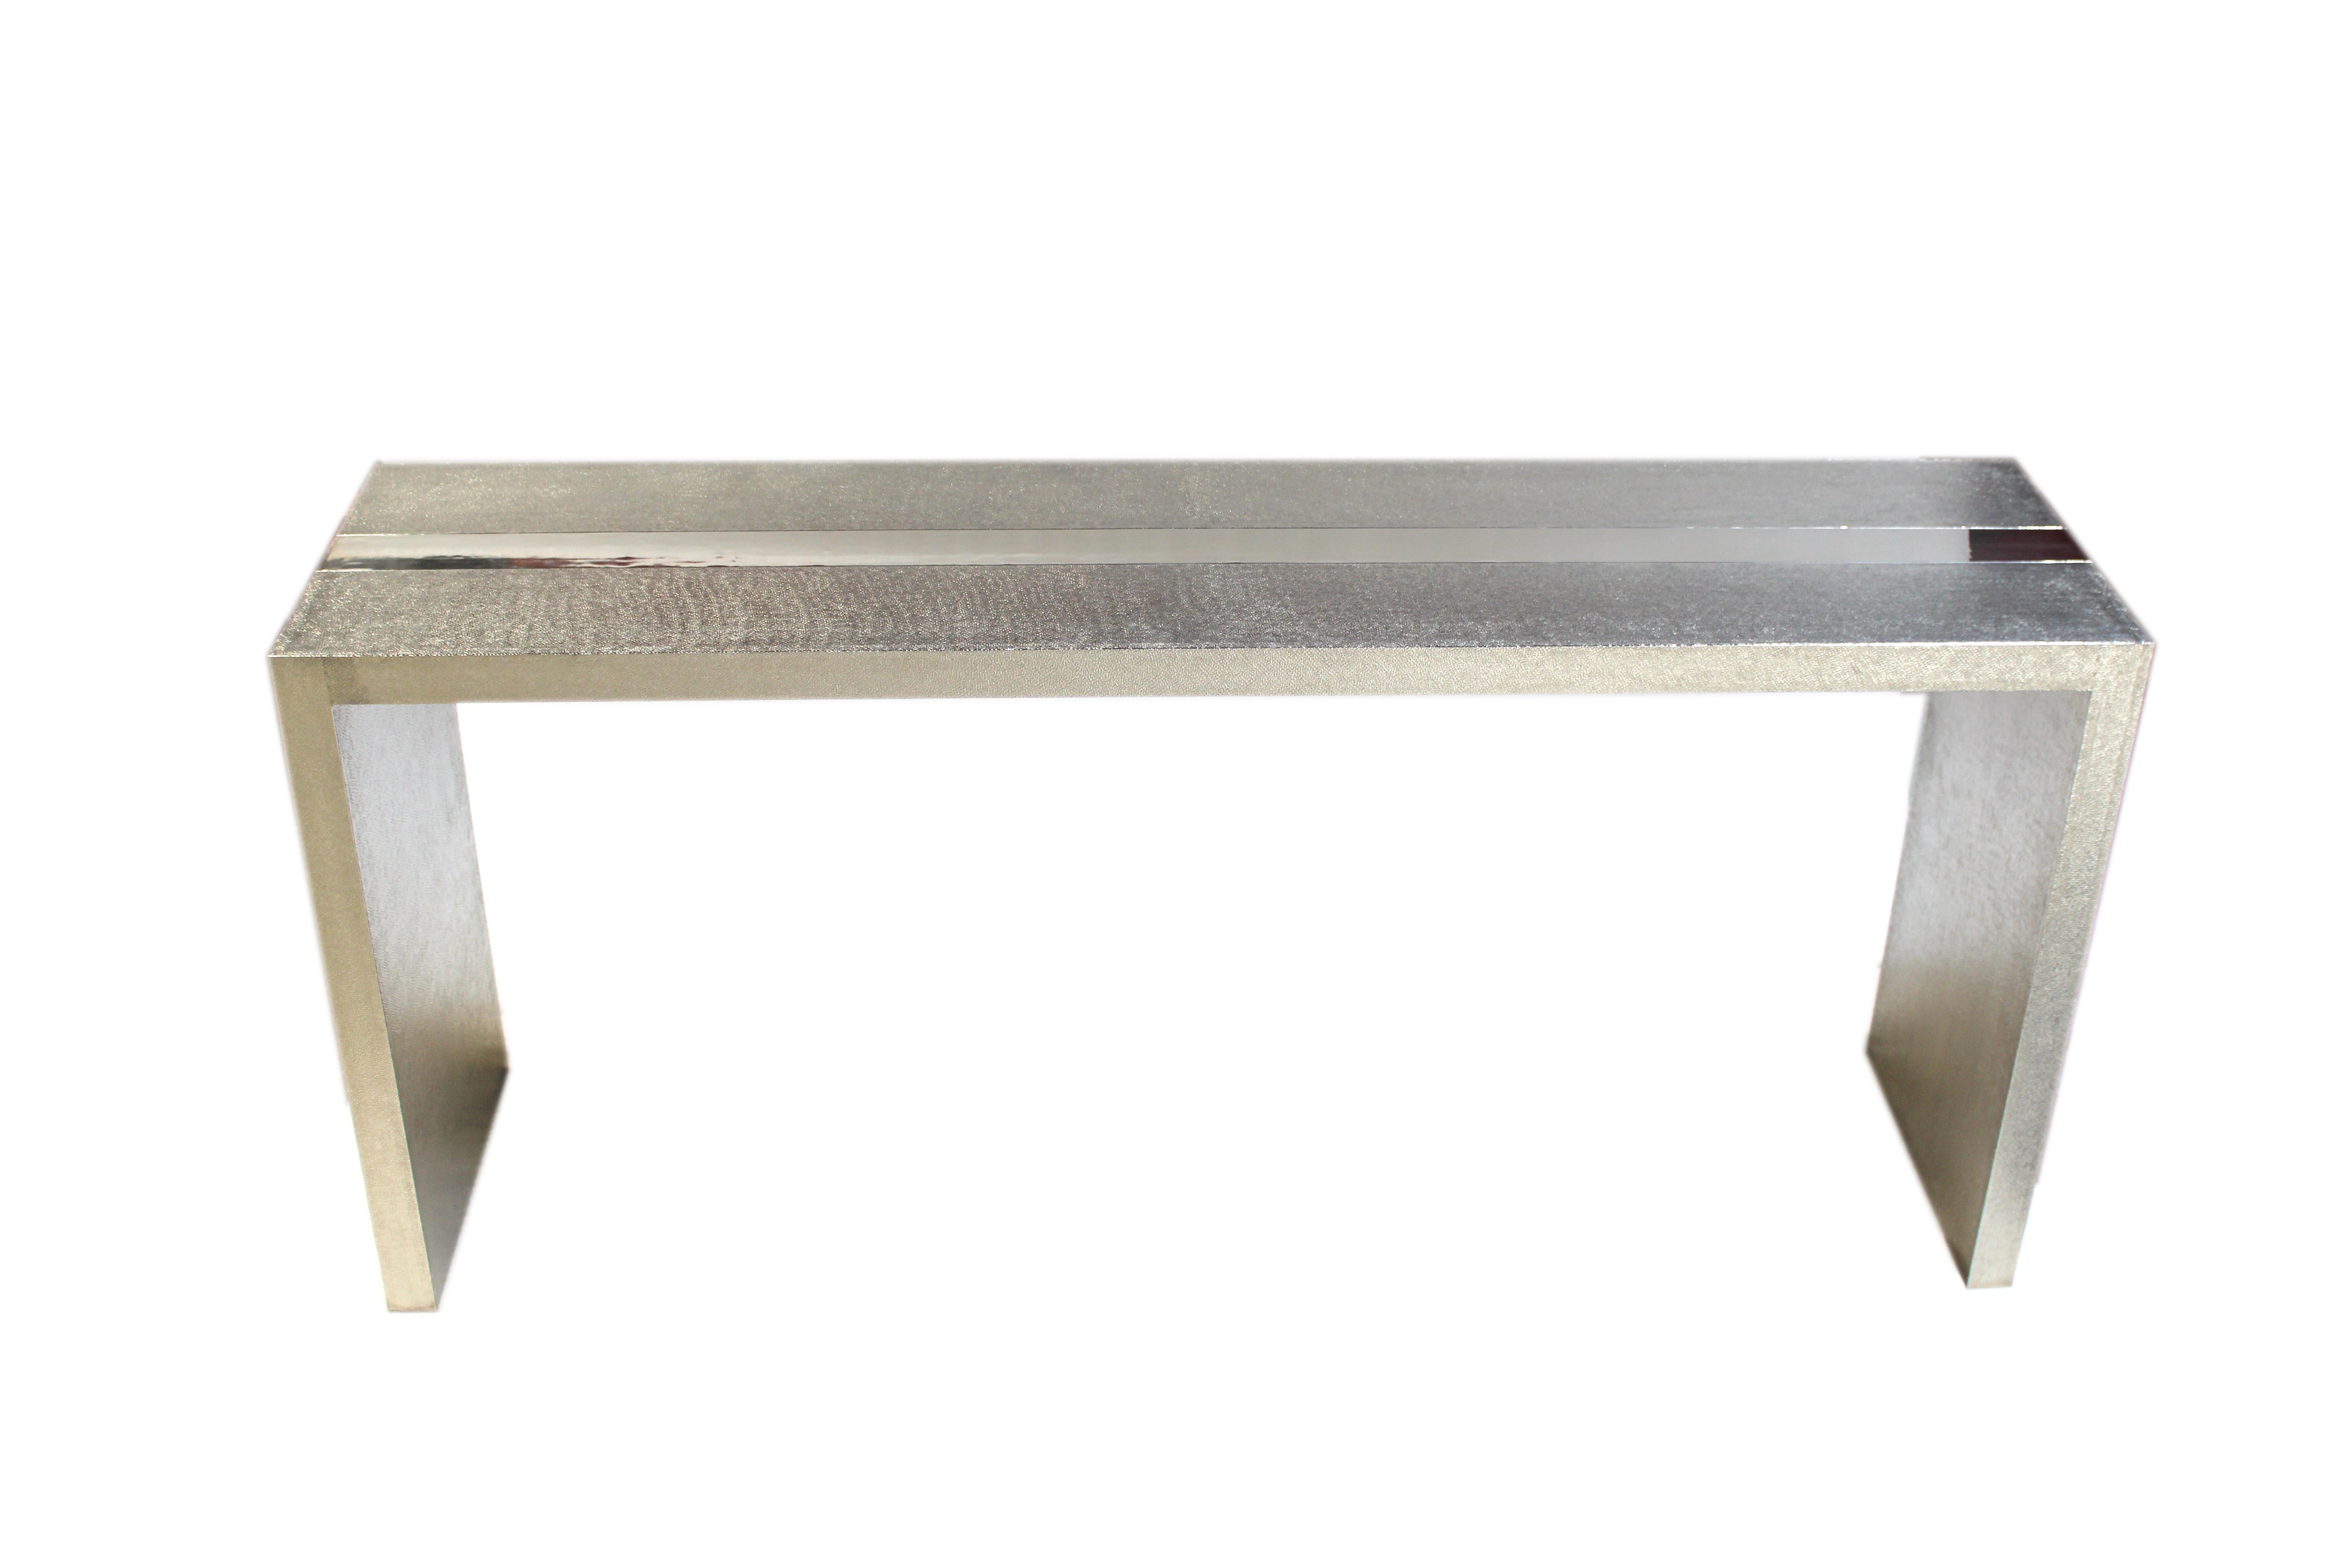 Art Deco Rectangular Console Tables Mid. Hammered Copper by Alison Spear For Sale 7